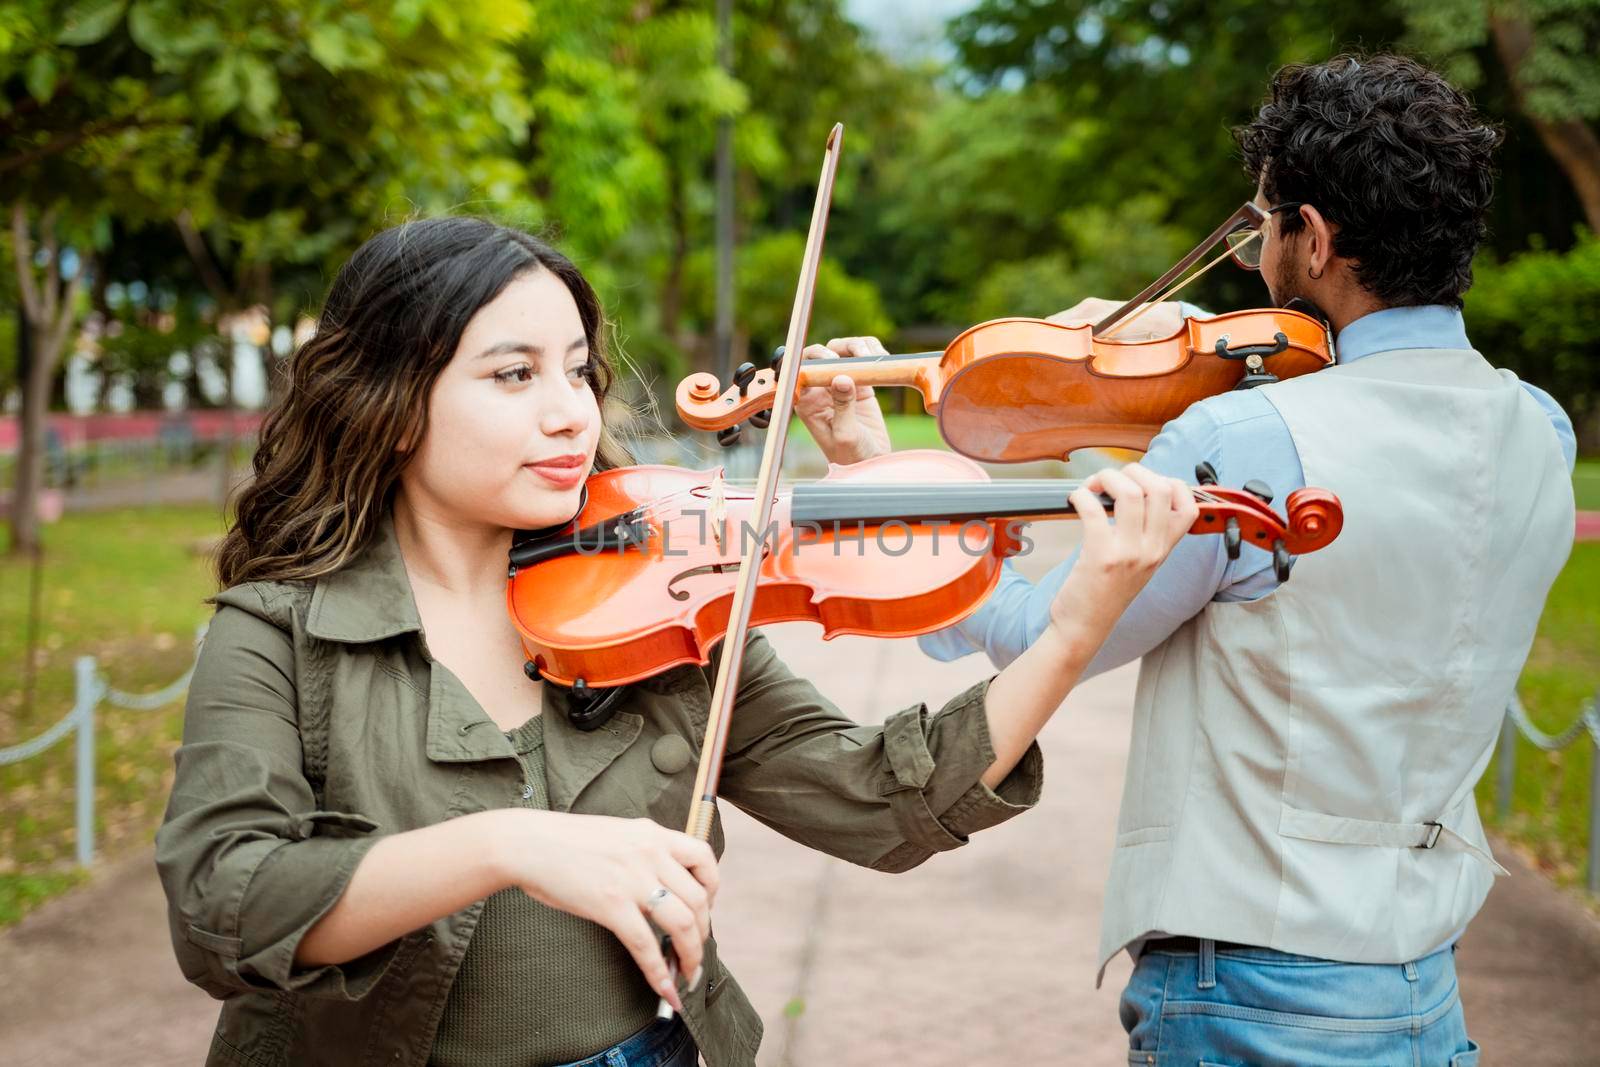 Two young violinists standing playing violin in a park. Portrait of man and woman together playing violin in park. Violinist man and woman back to back playing violin in a park outdoors by isaiphoto